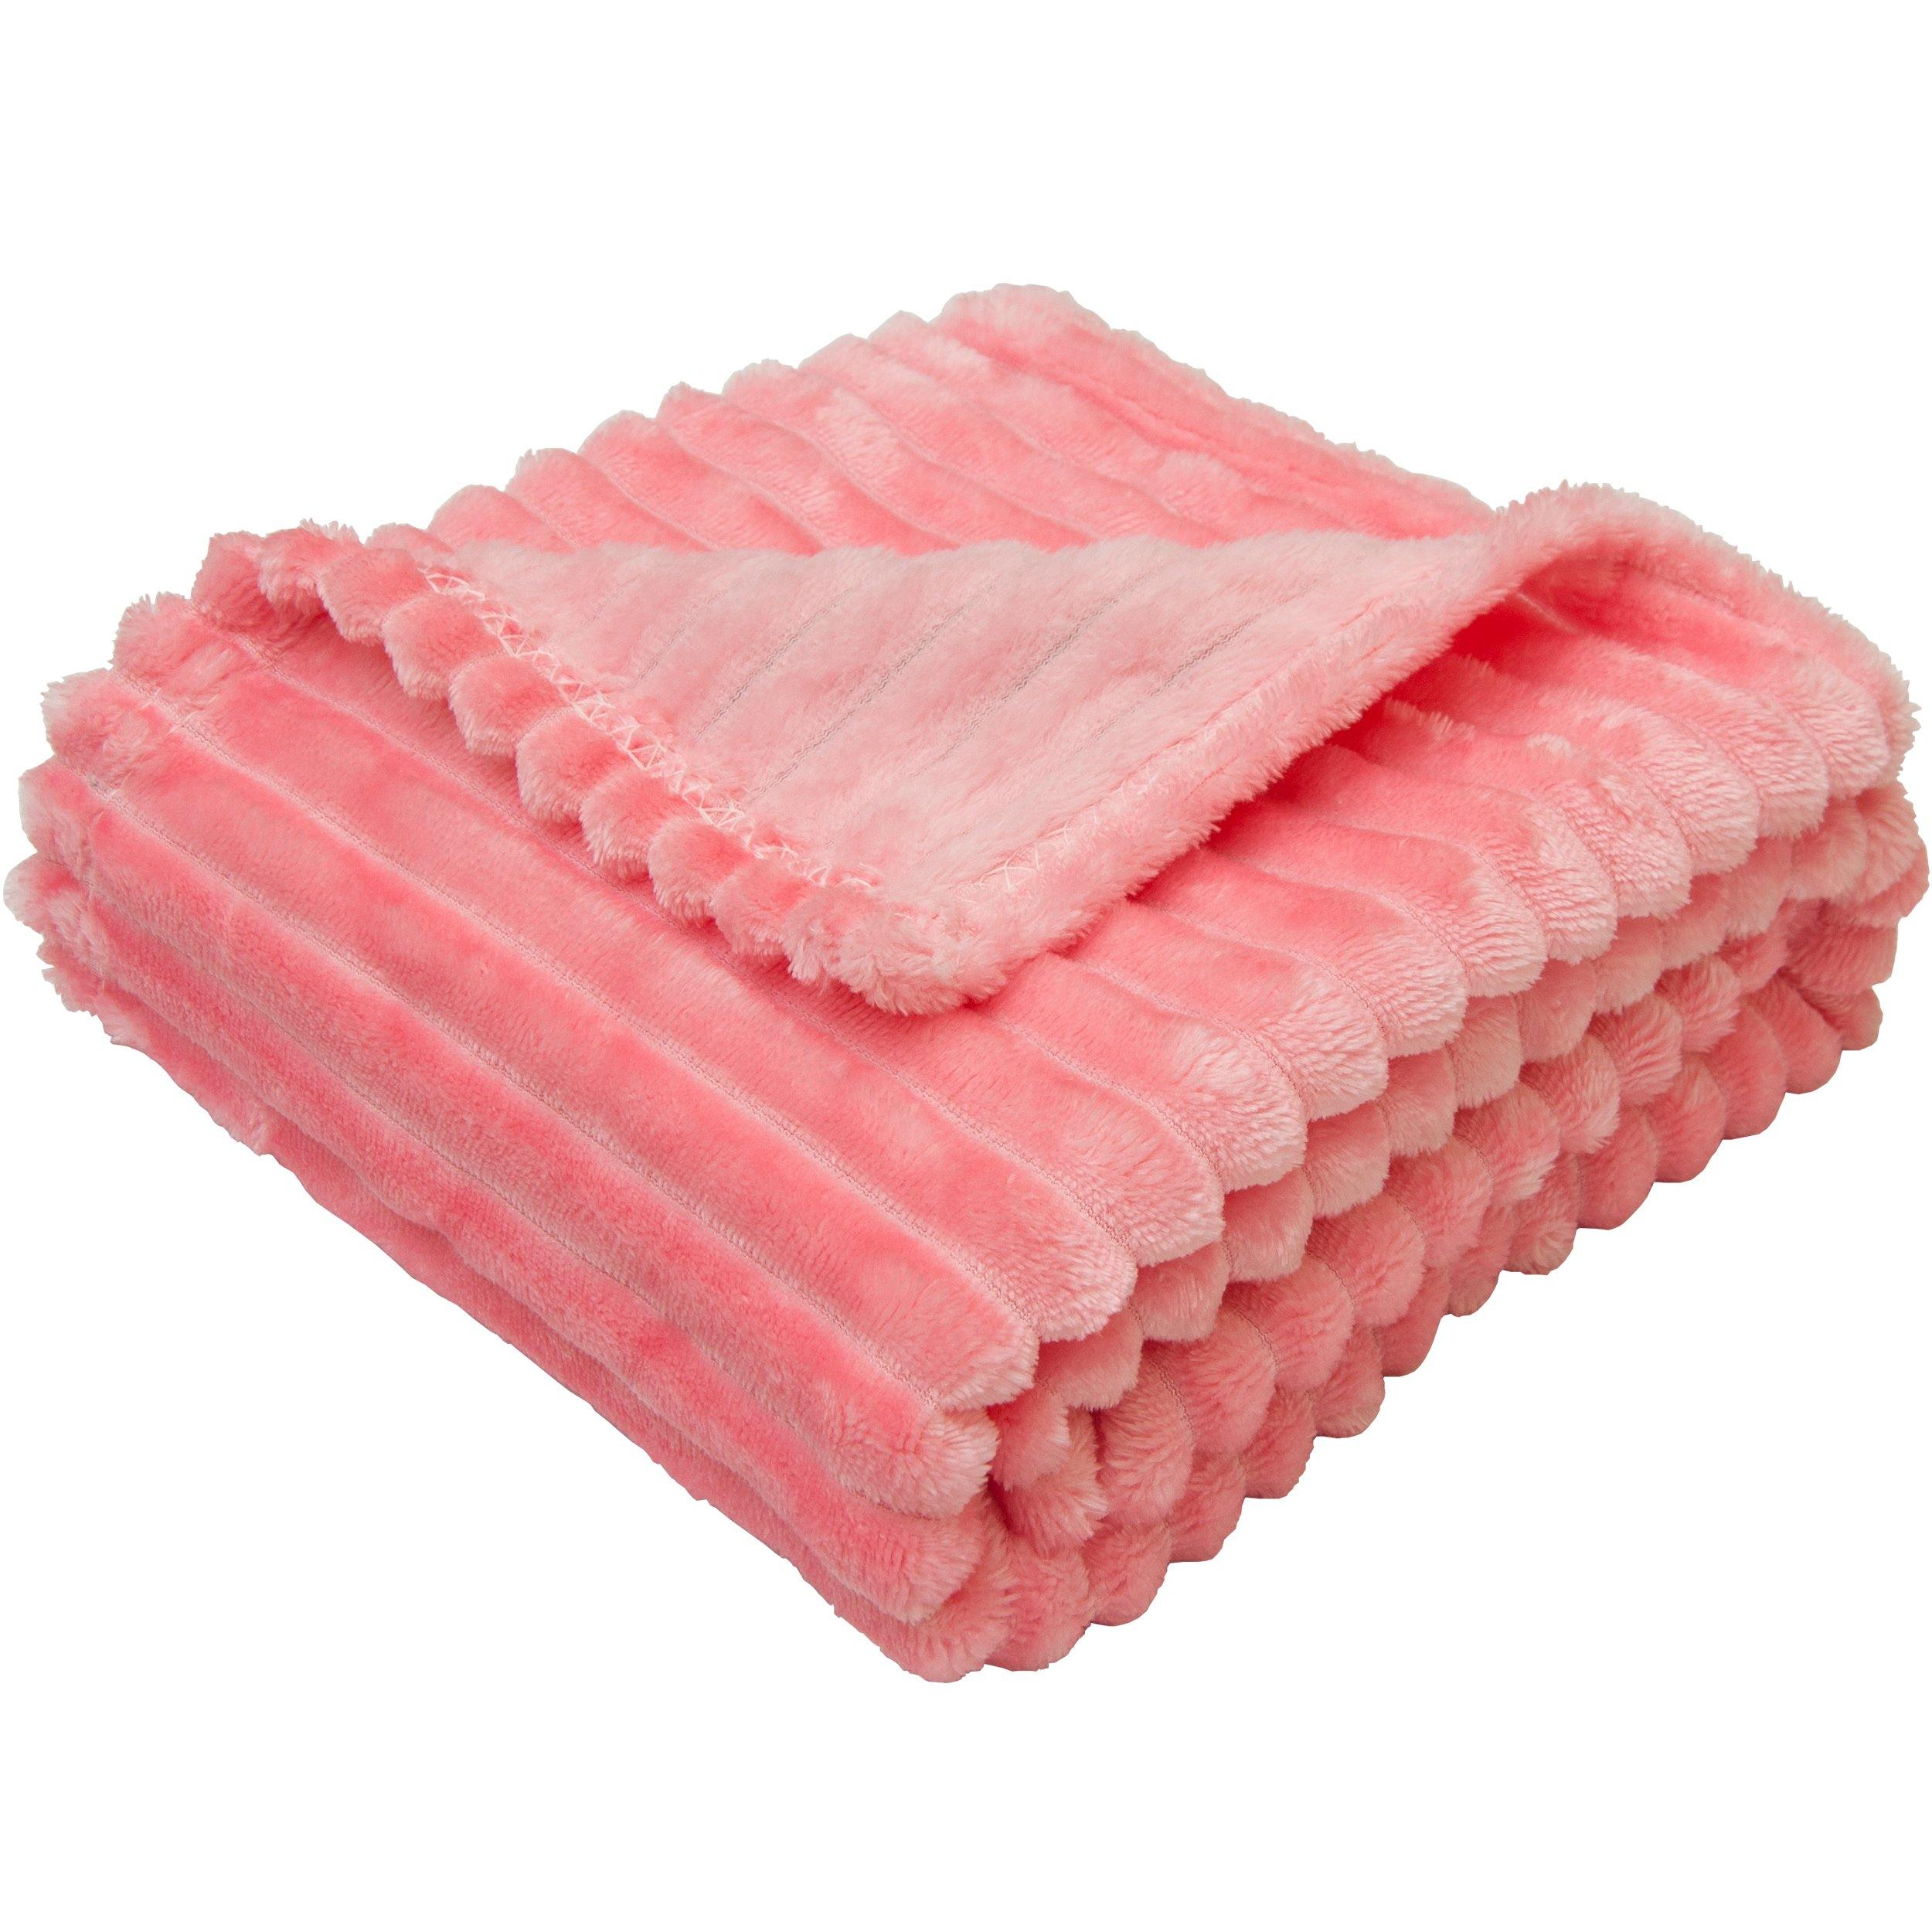 Ntbay Flannel Fuzzy Toddler Blanket, Fluffy Warm and Lightweight Reversible Stripes Design Baby Plush Blanket, 30x40 Inches, Pink